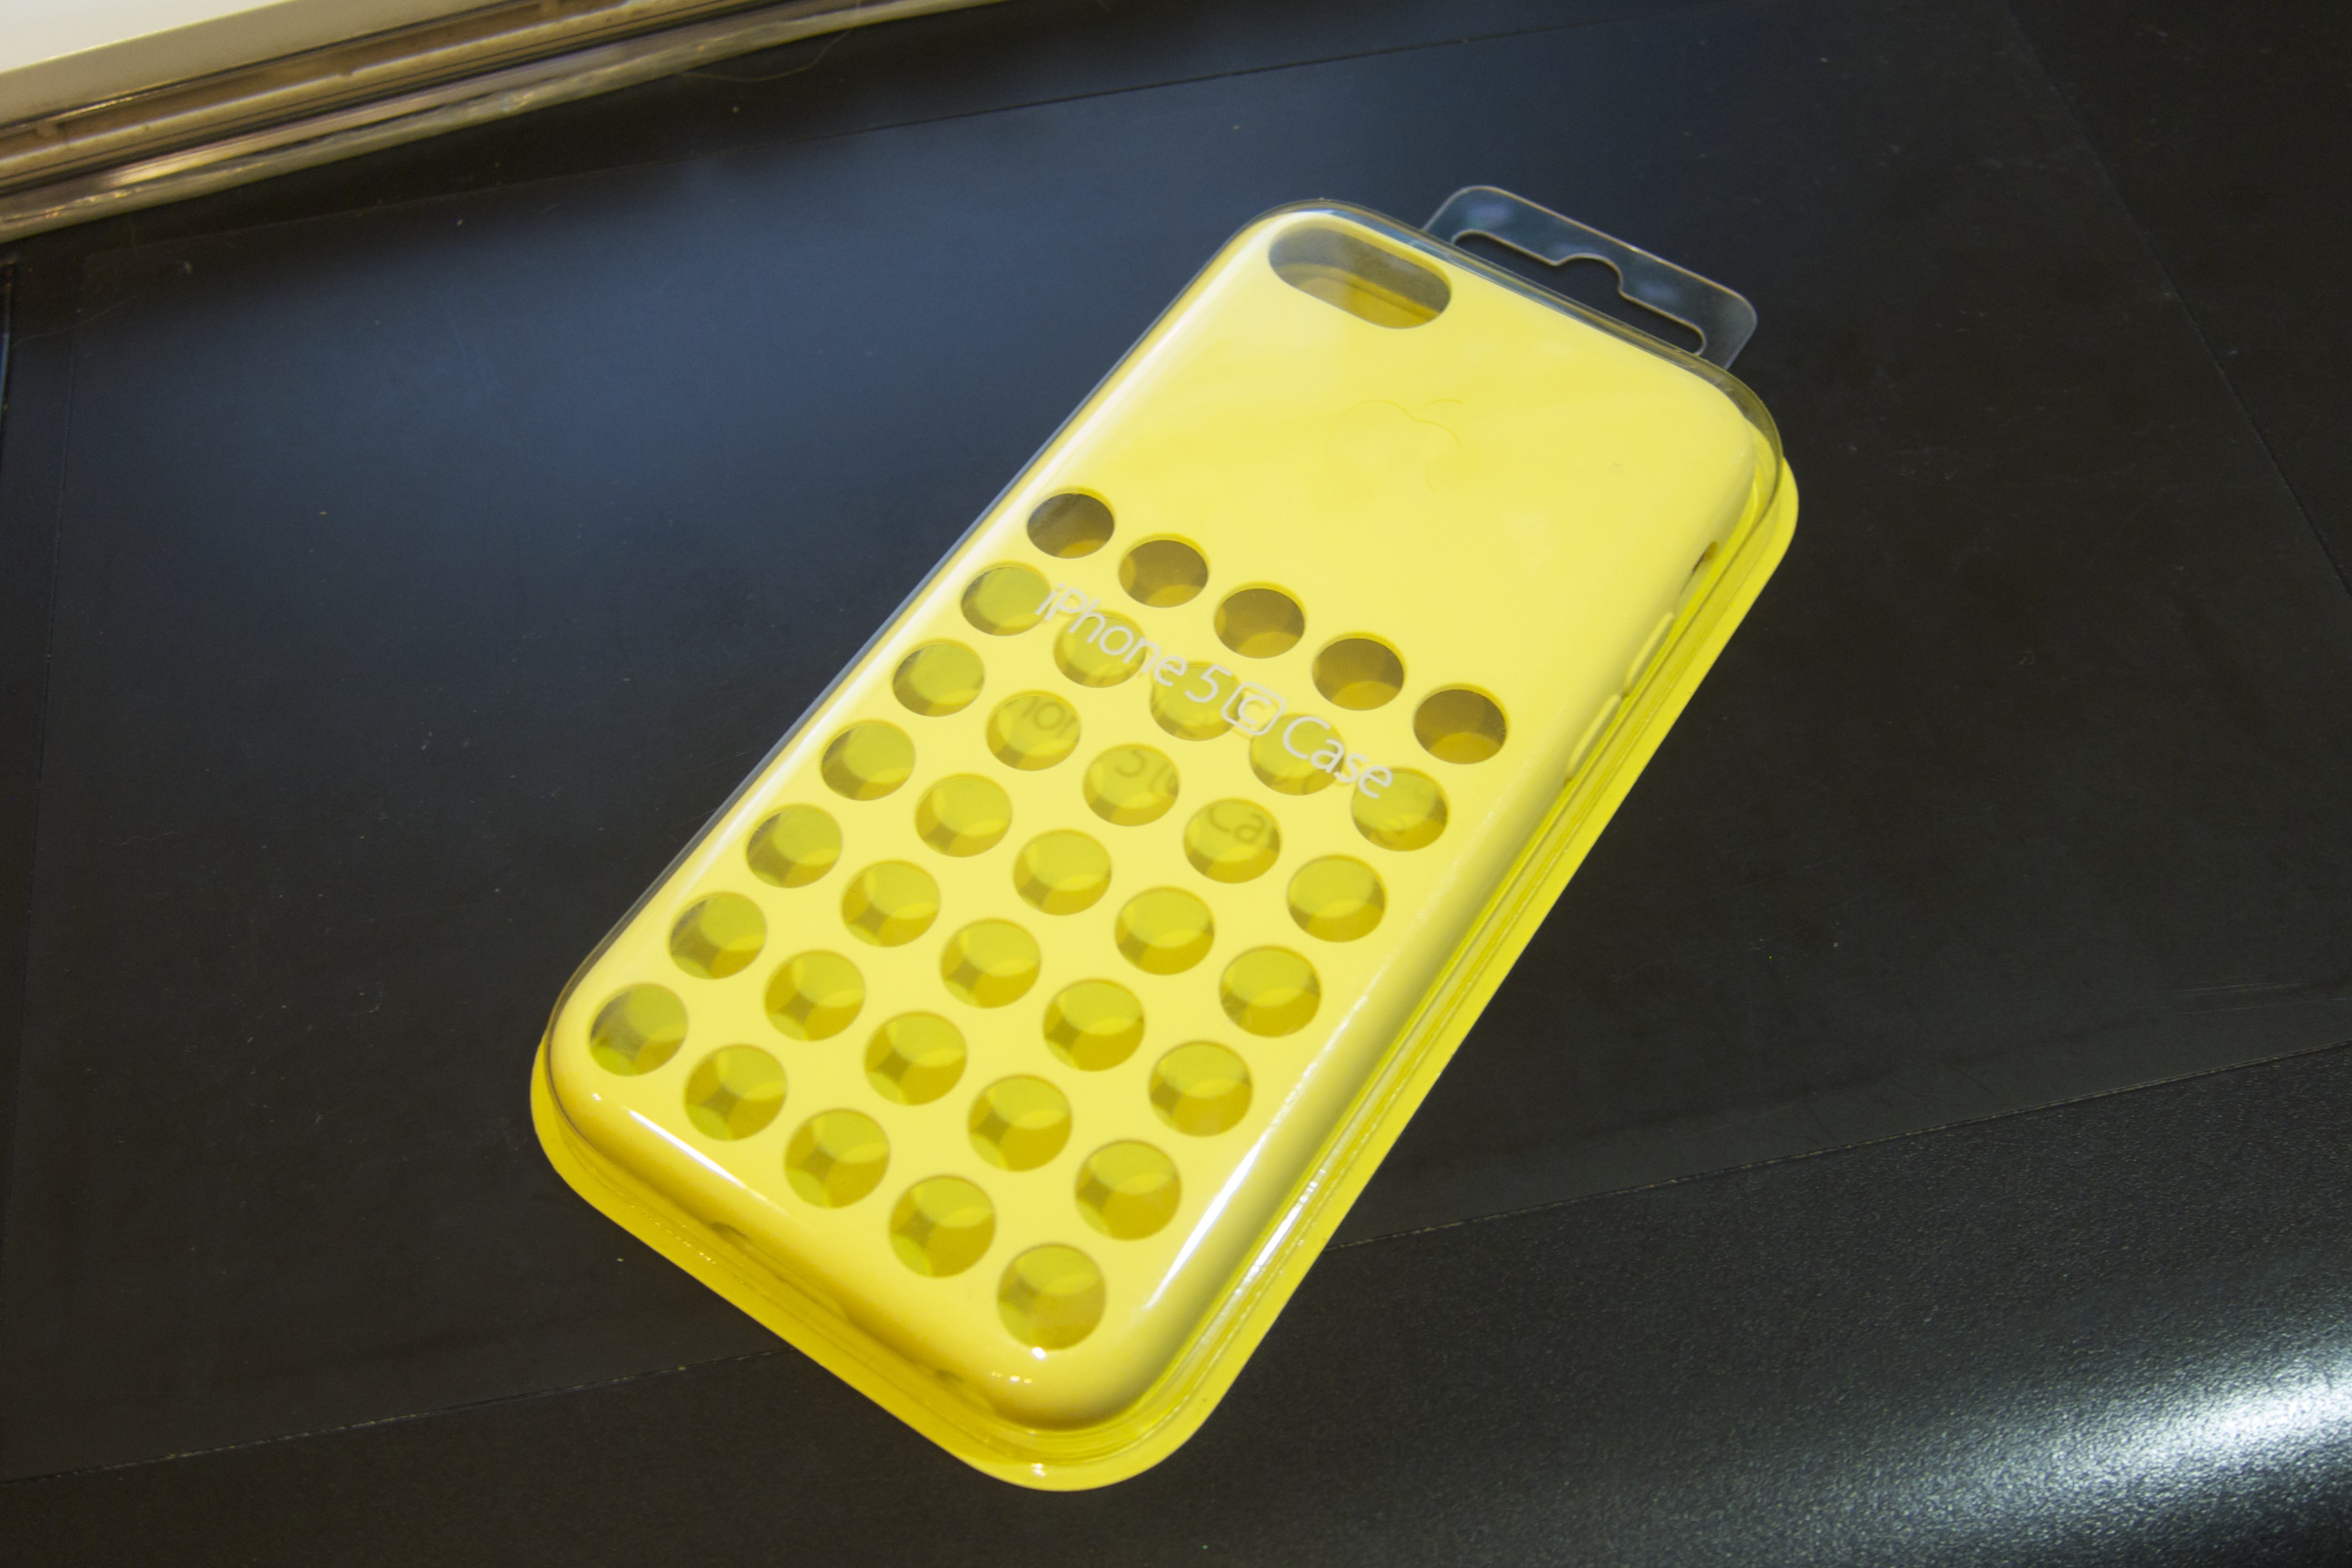 iPhone 5c and case